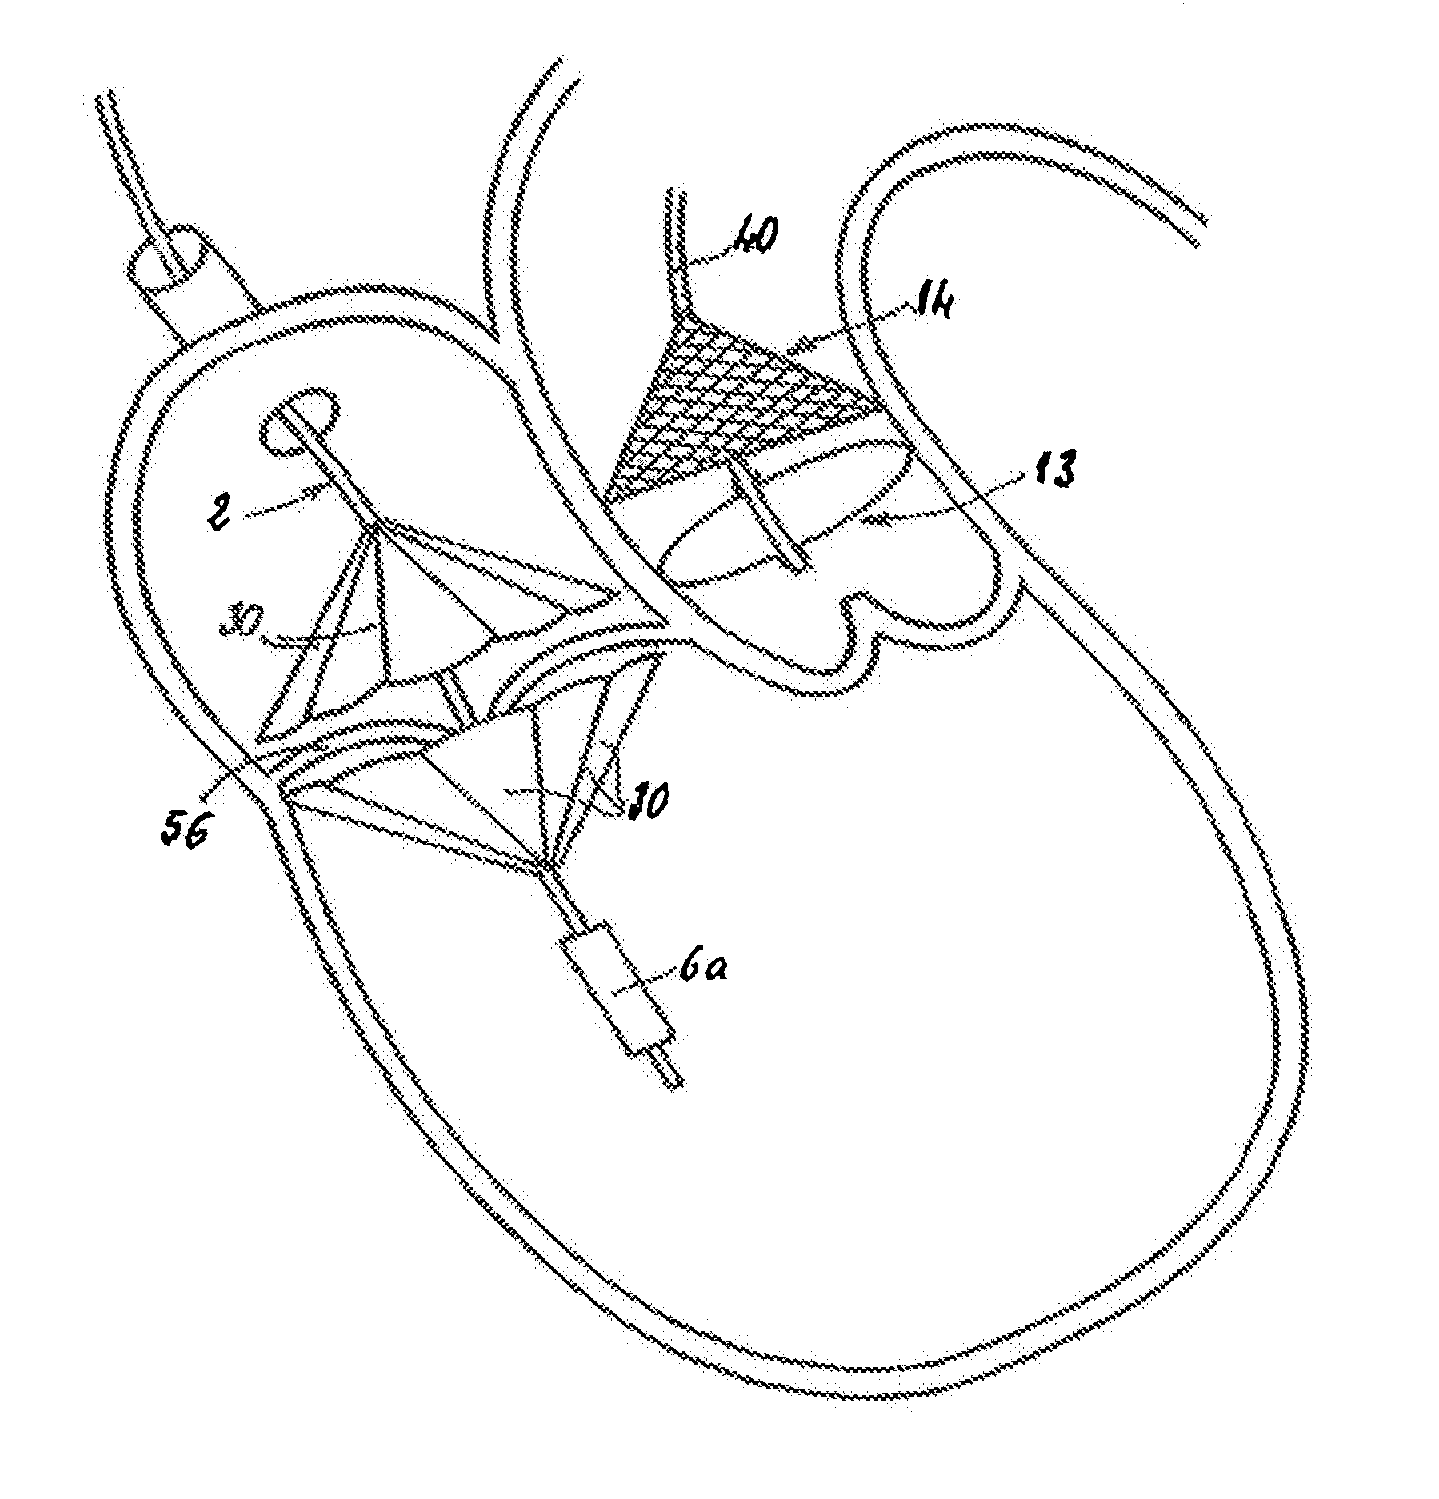 Prosthetic Valve For Transluminal Delivery